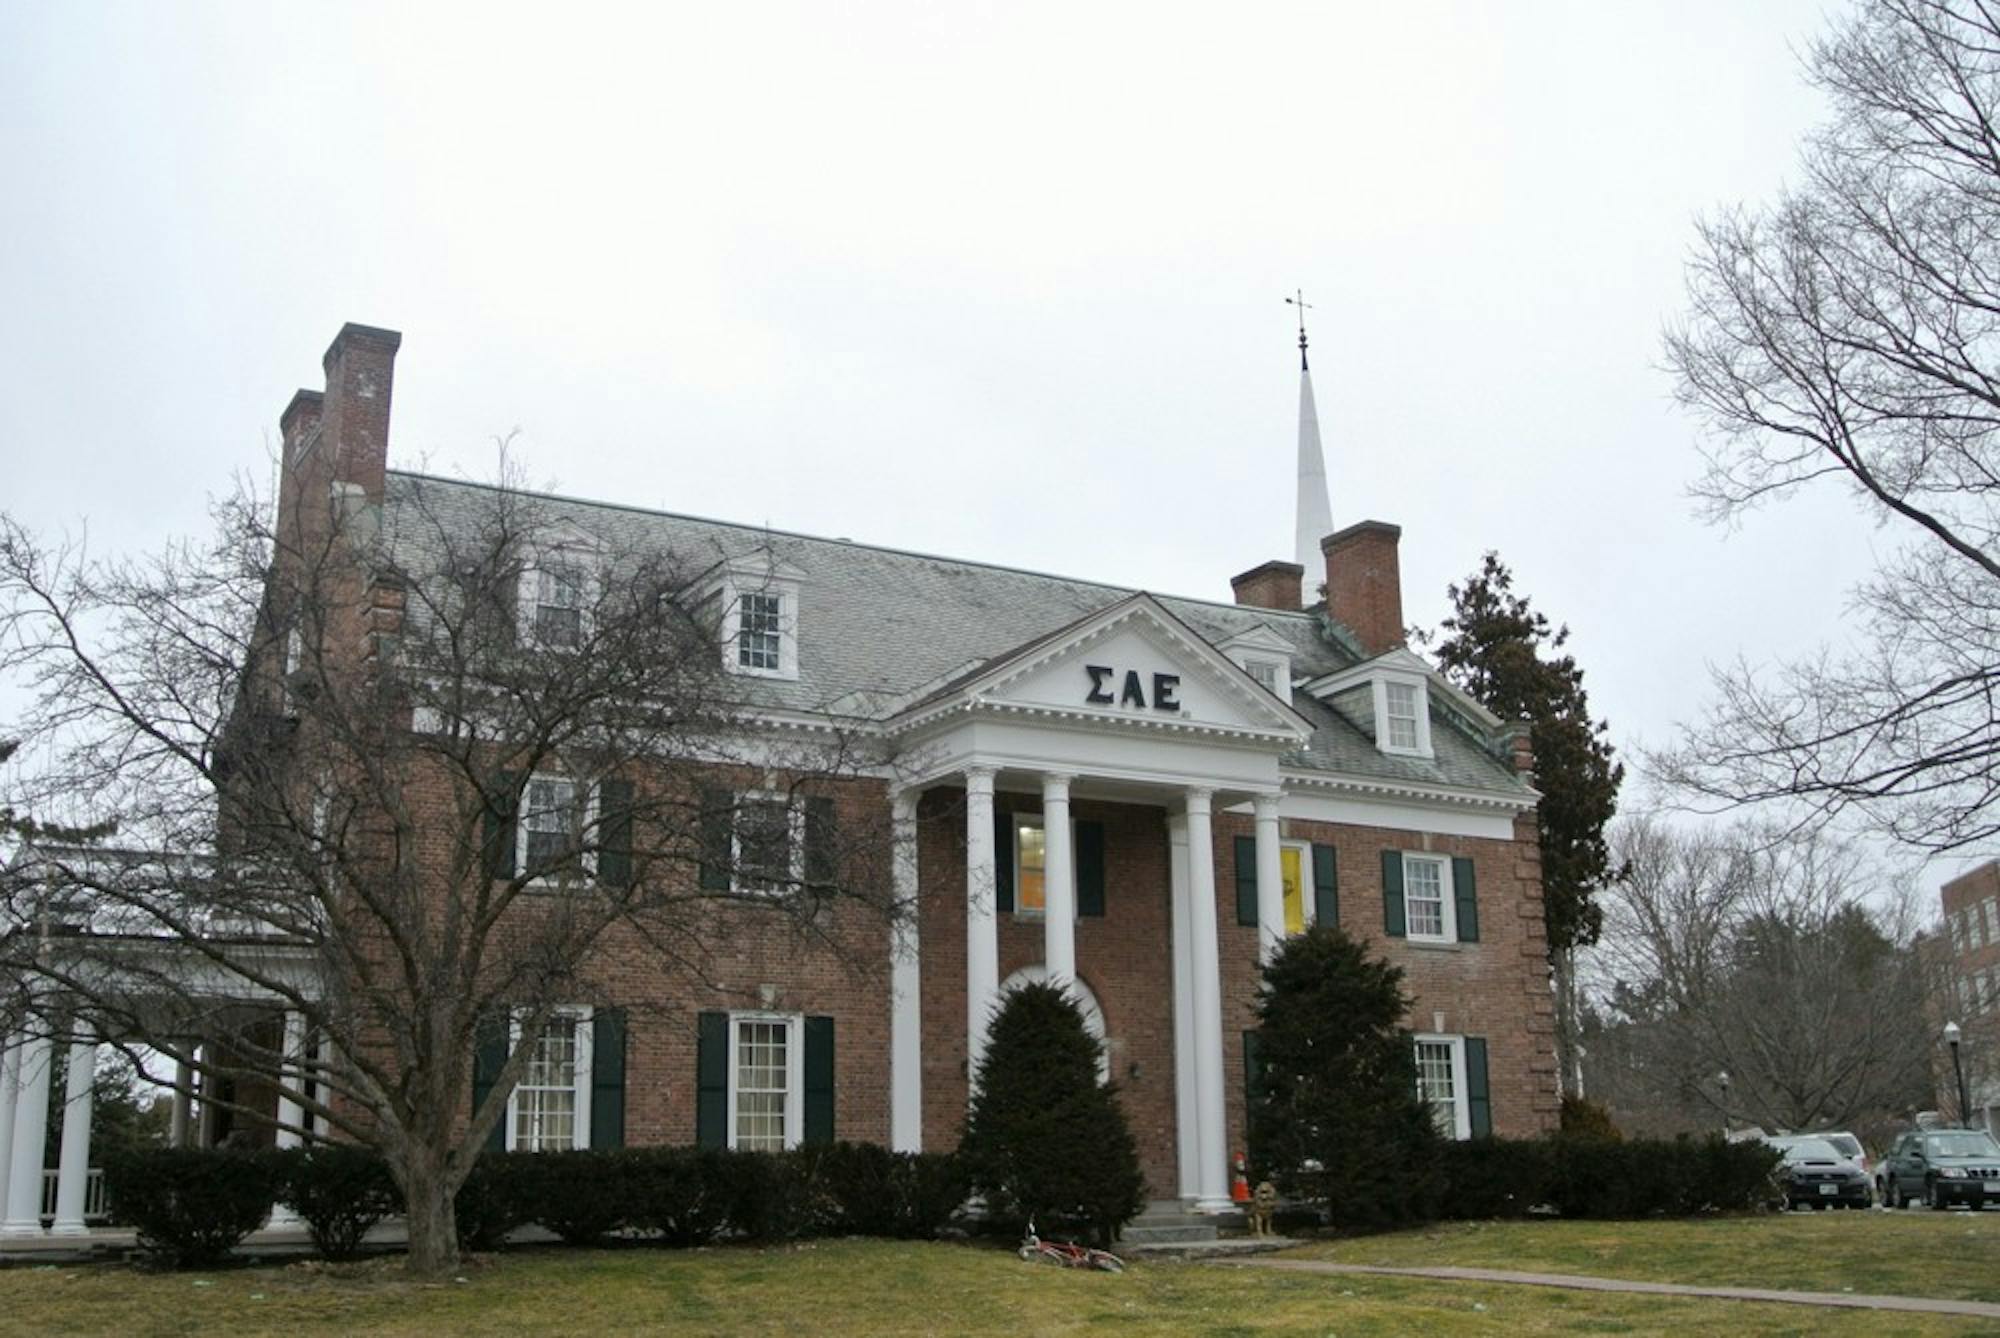 The unanimous vote by the Hanover Zoning Board Adjustment  grants Sigma Alpha Epsilon fraternity’s appeal for continued use of their house as a student residence.